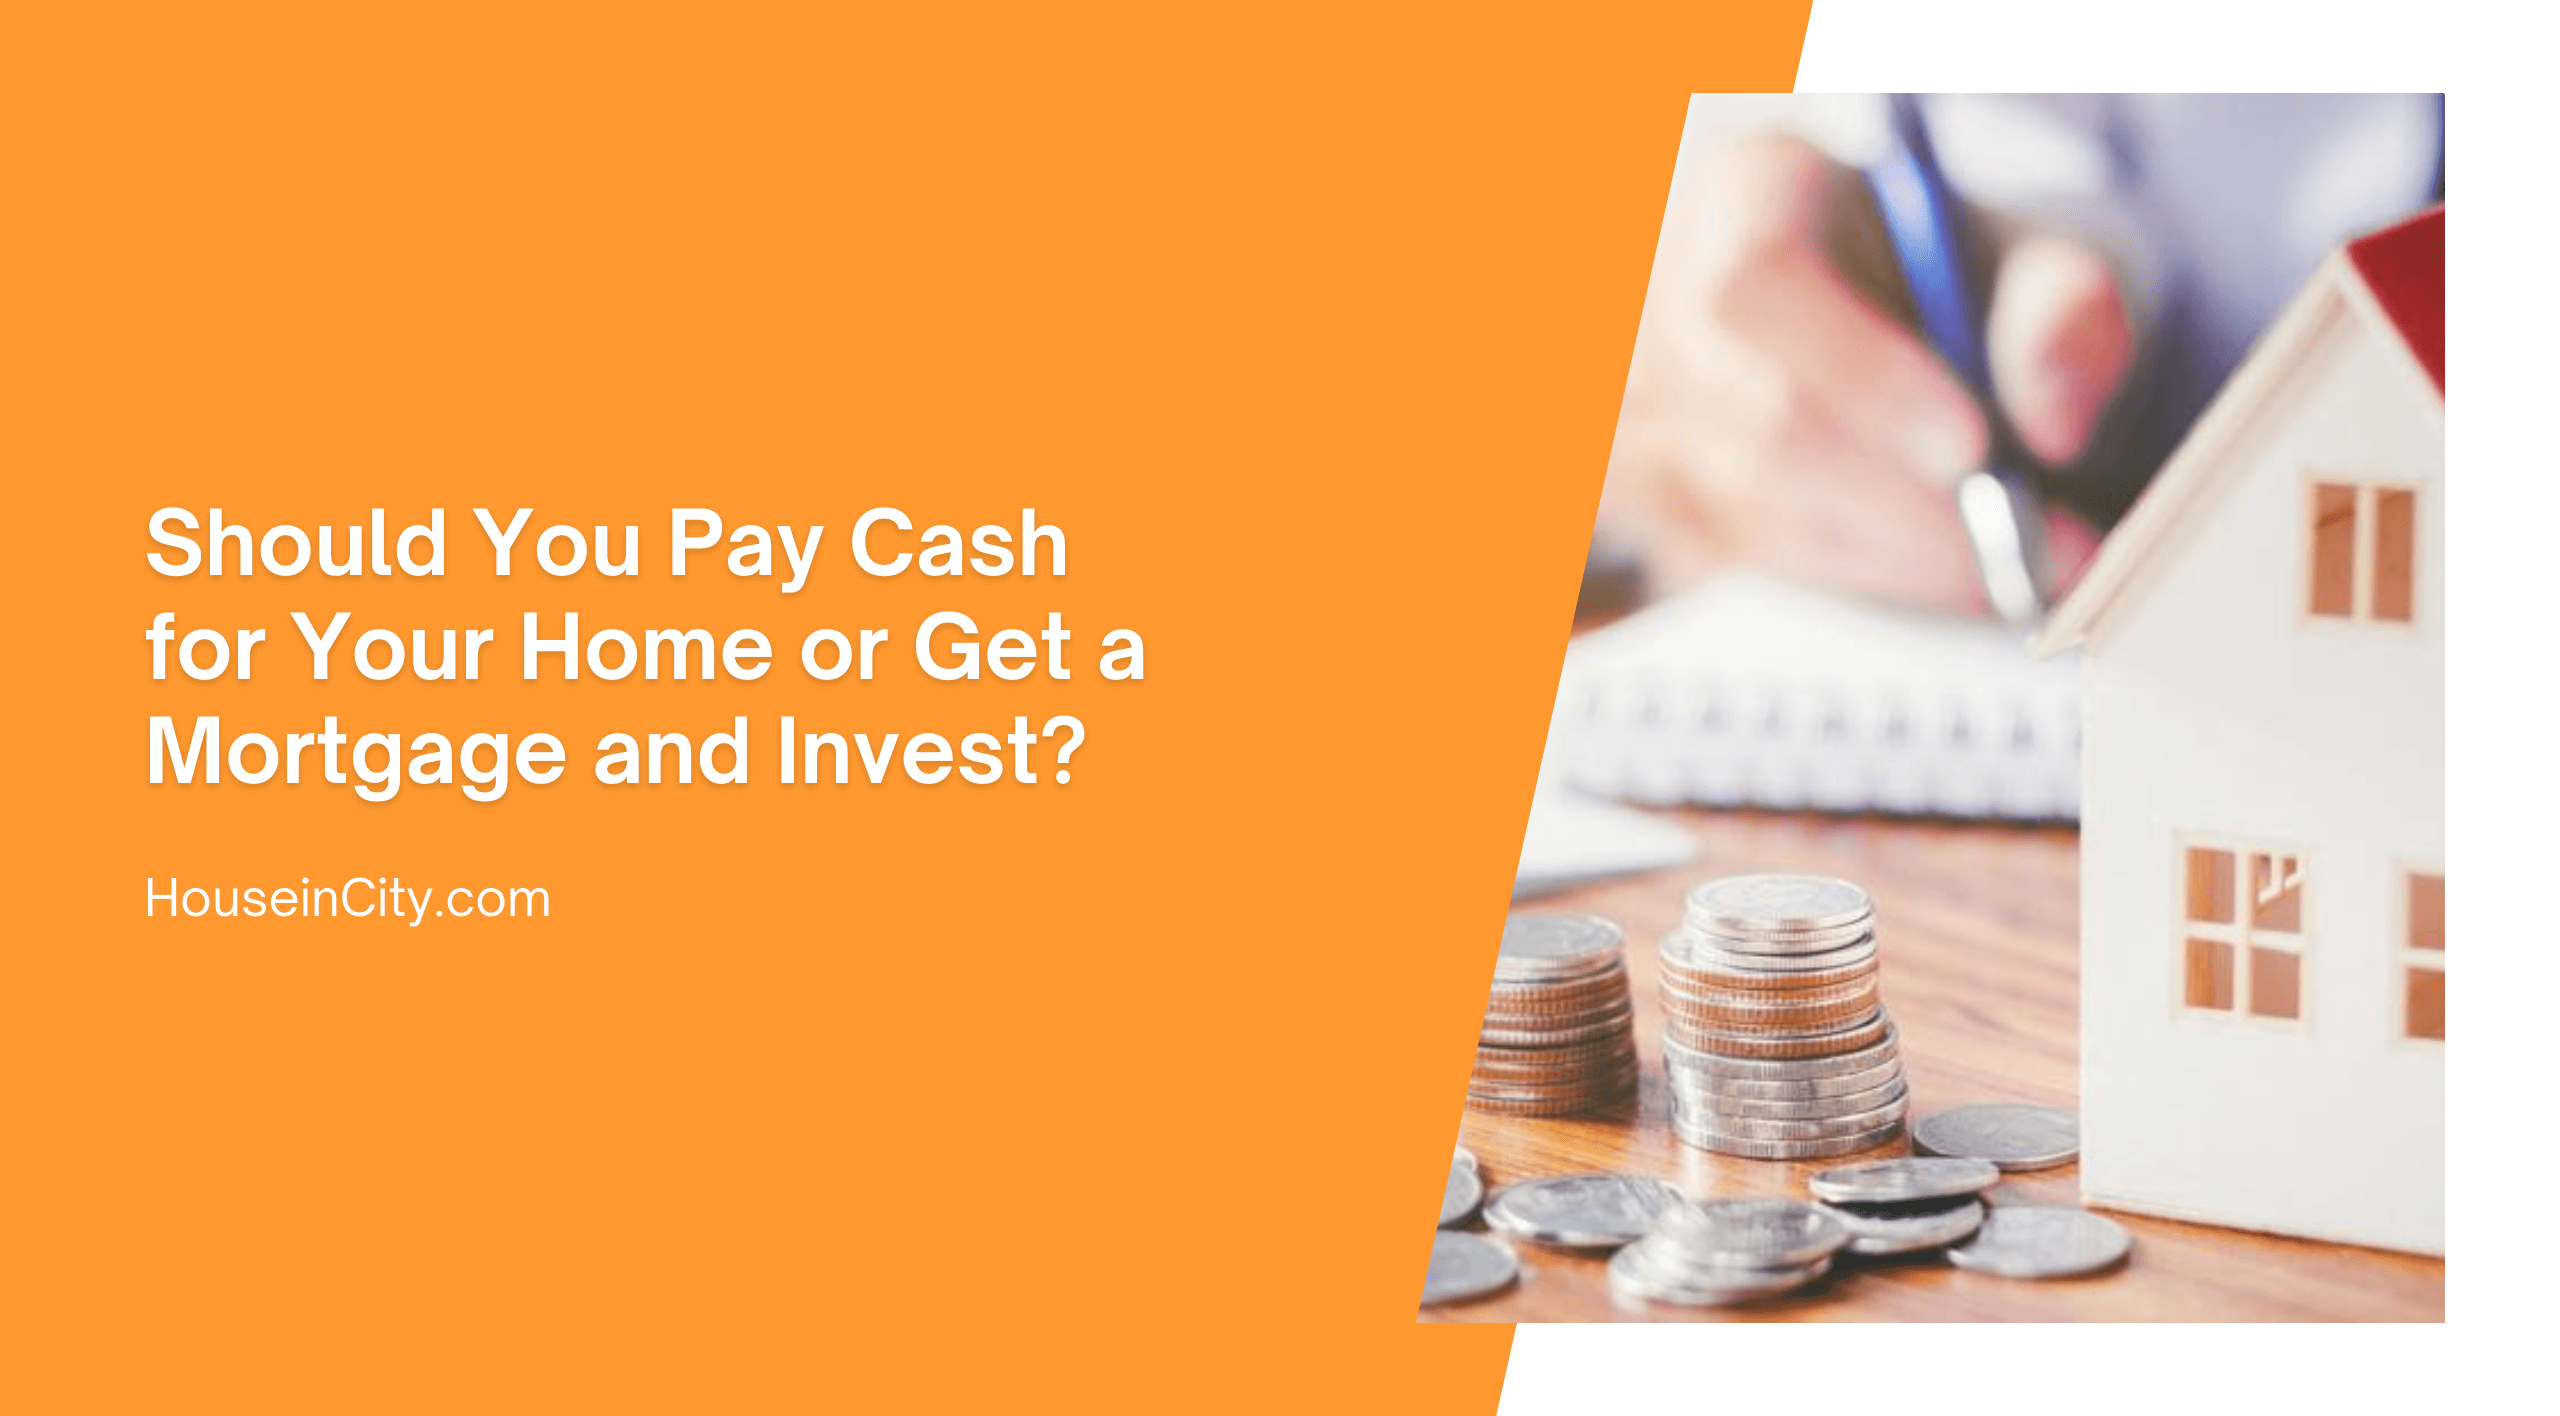 Should You Pay Cash for Your Home or Get a Mortgage and Invest?